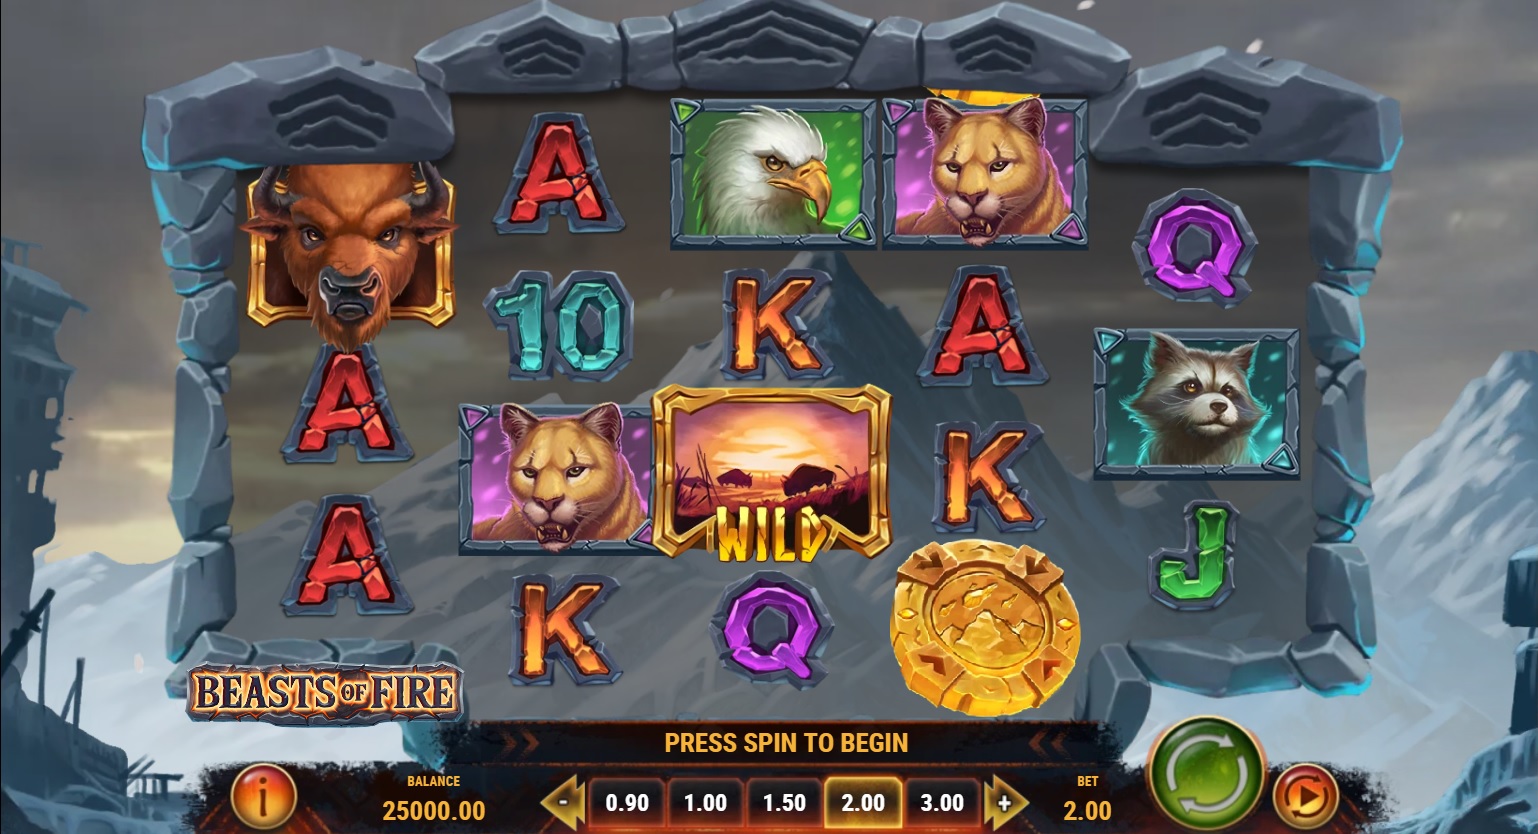 Beasts of Fire slot game